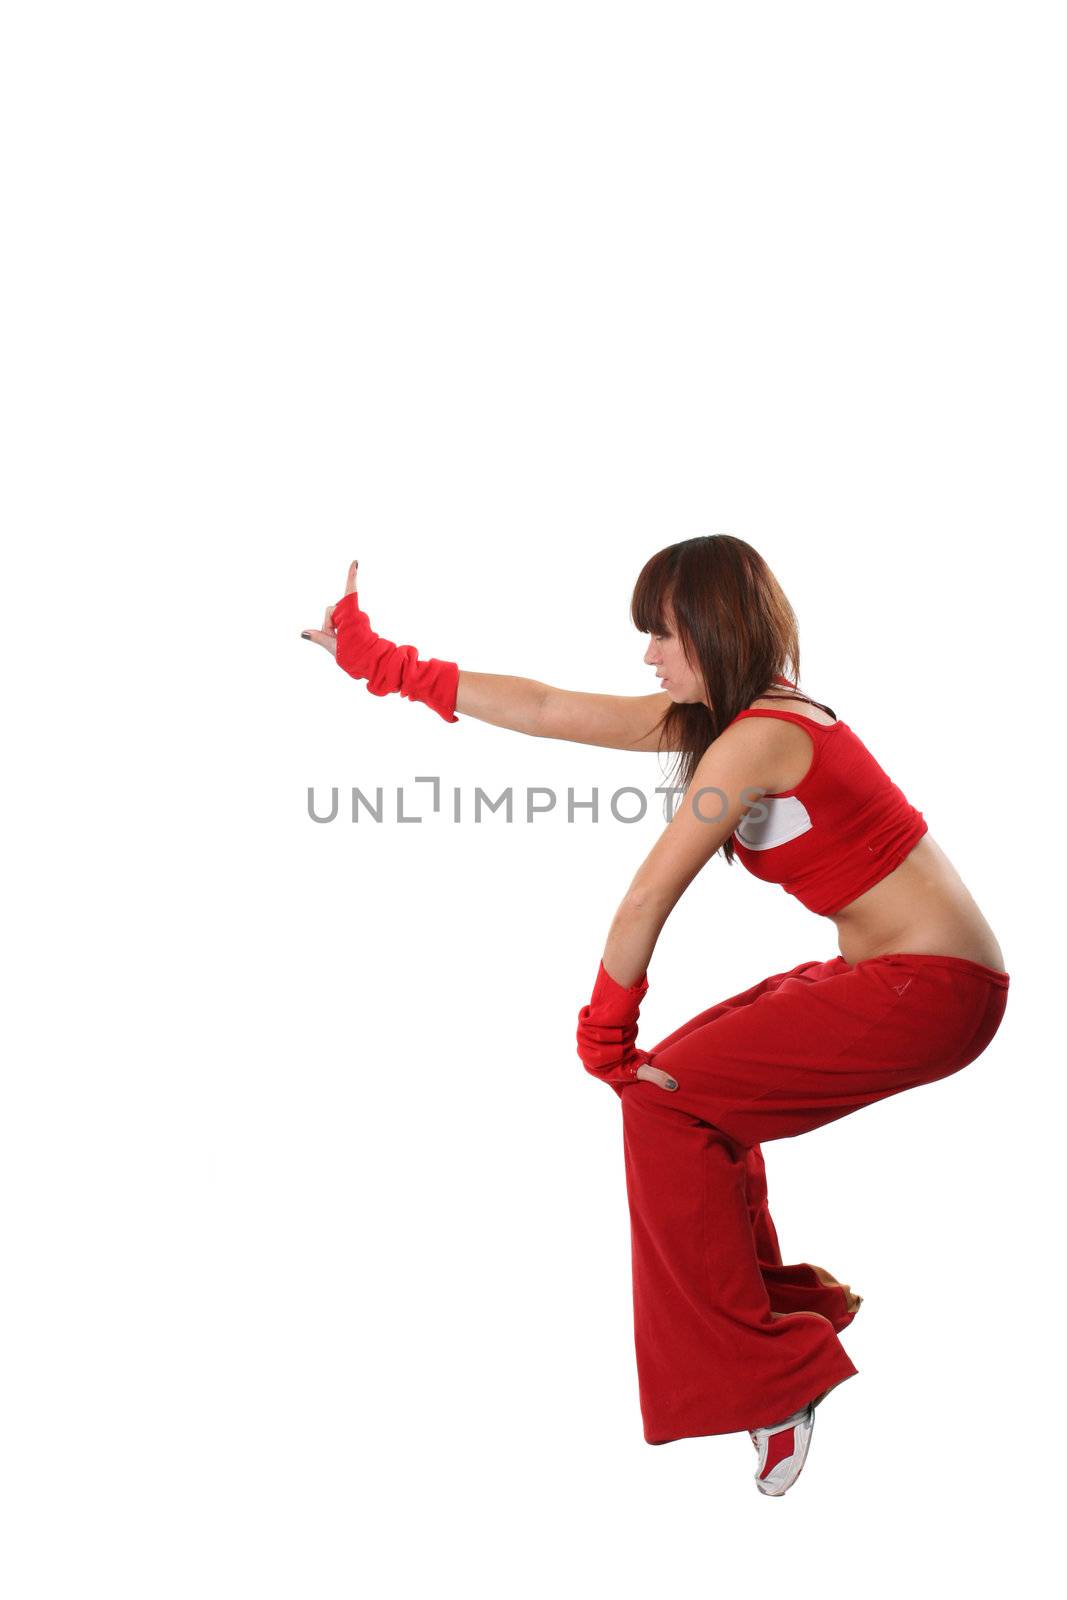 The beautiful girl dances in a red suit 